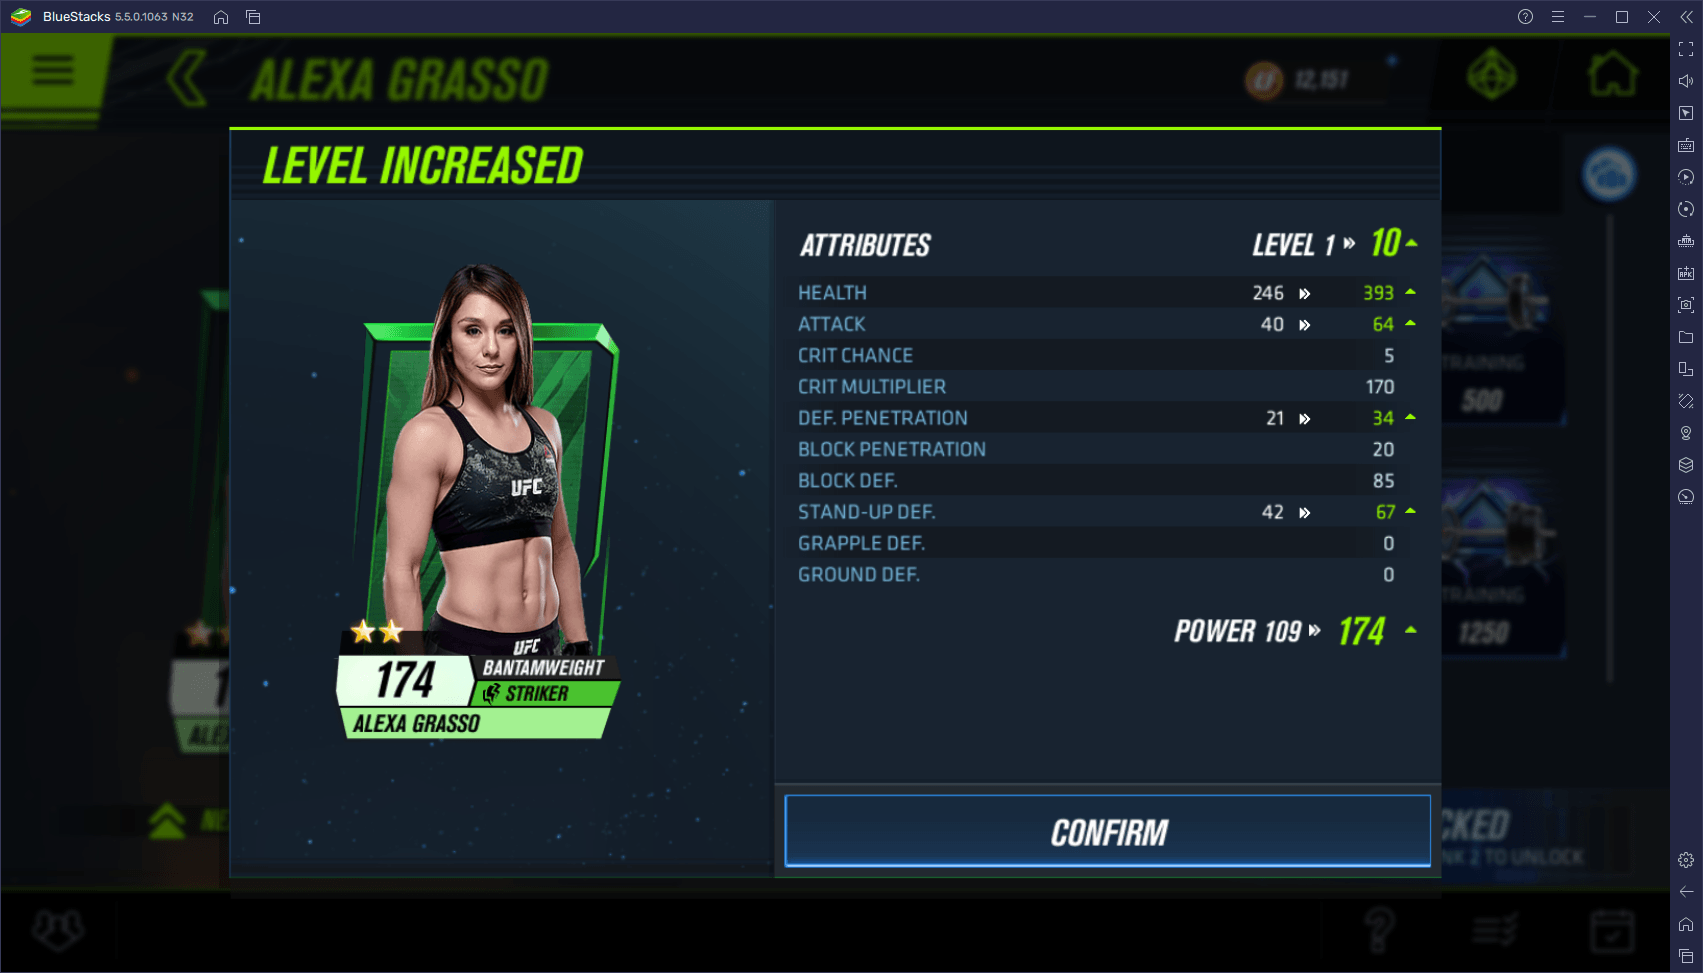 UFC Mobile 2 General Tips and Tricks to Optimize Your Team